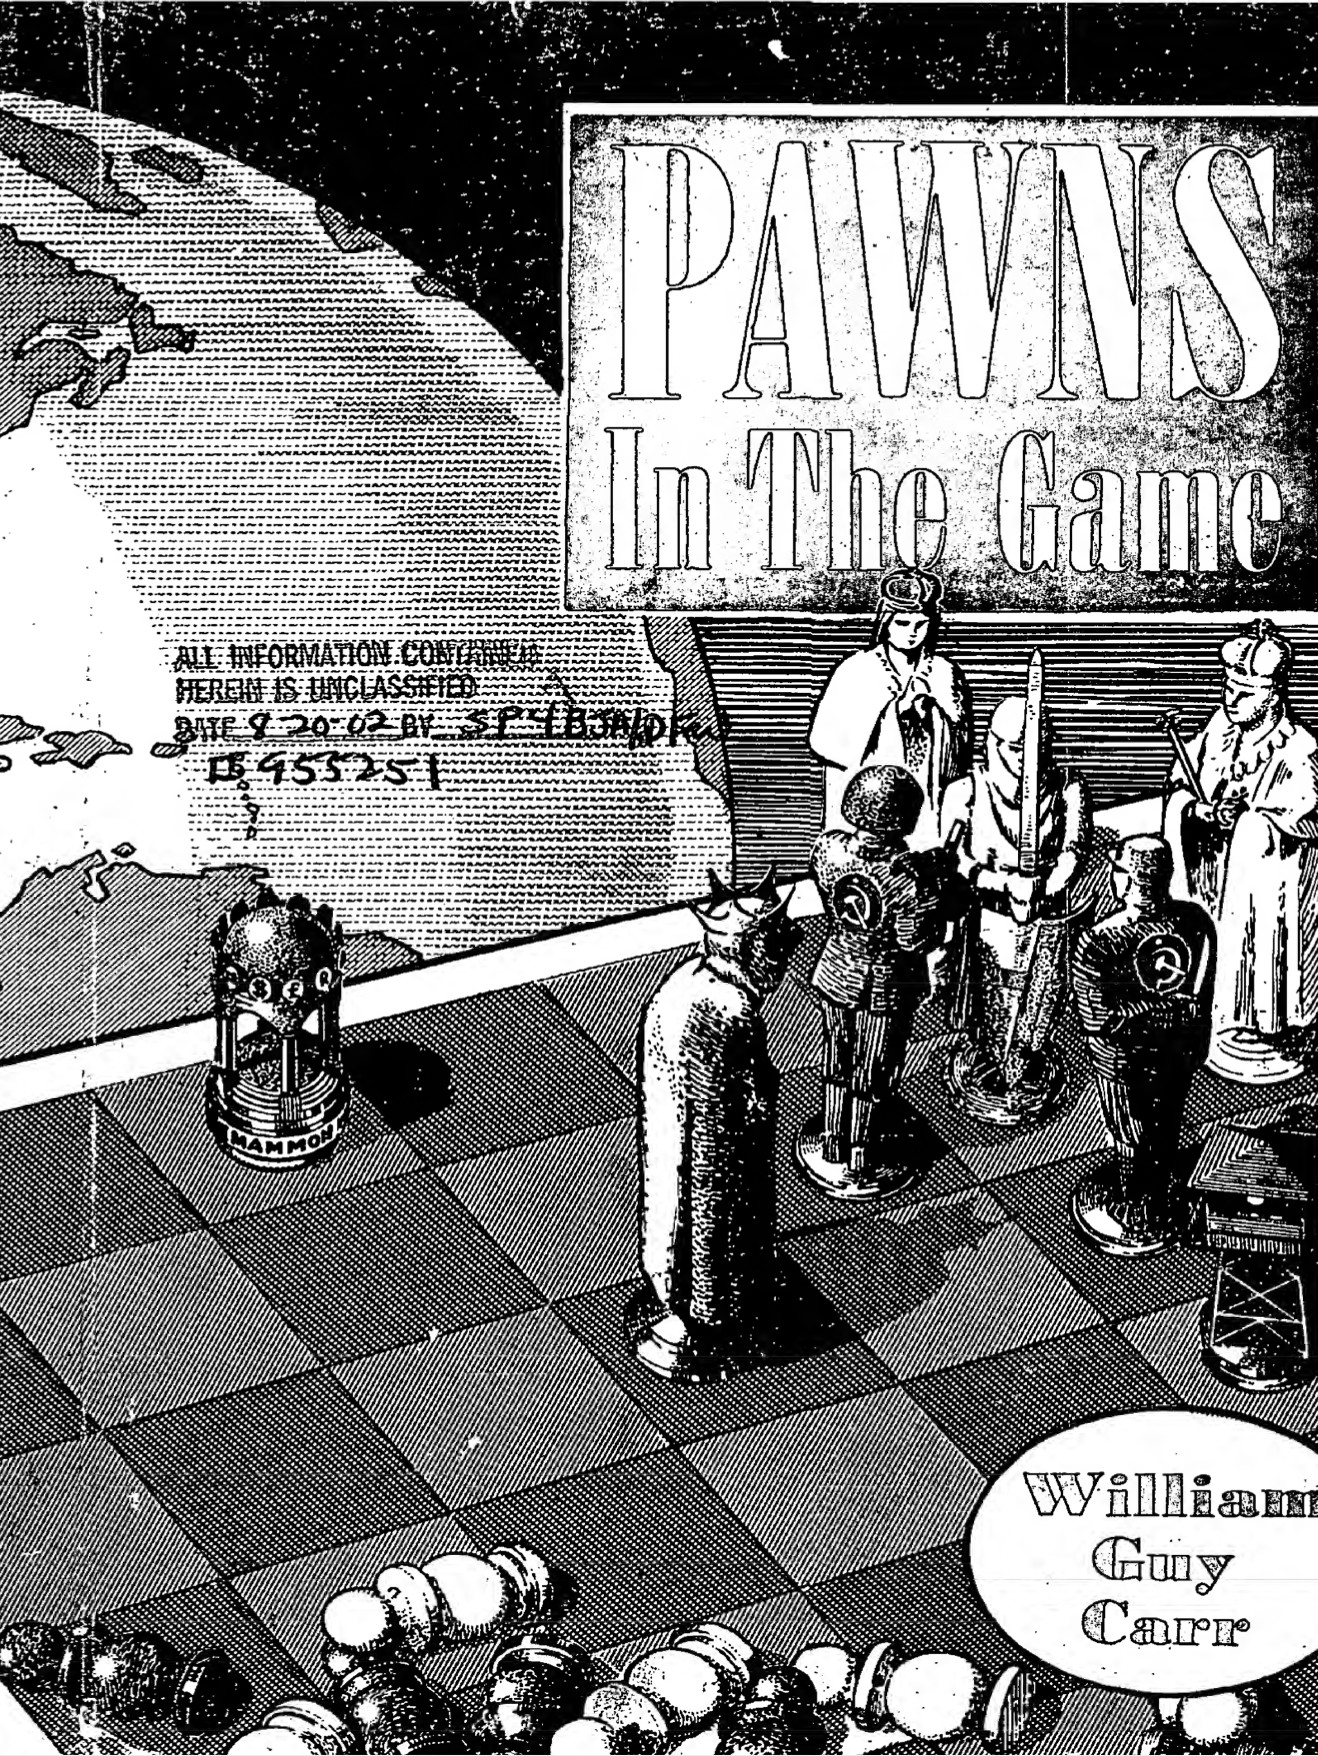 Pawns in the Game (1955) by William Guy Carr